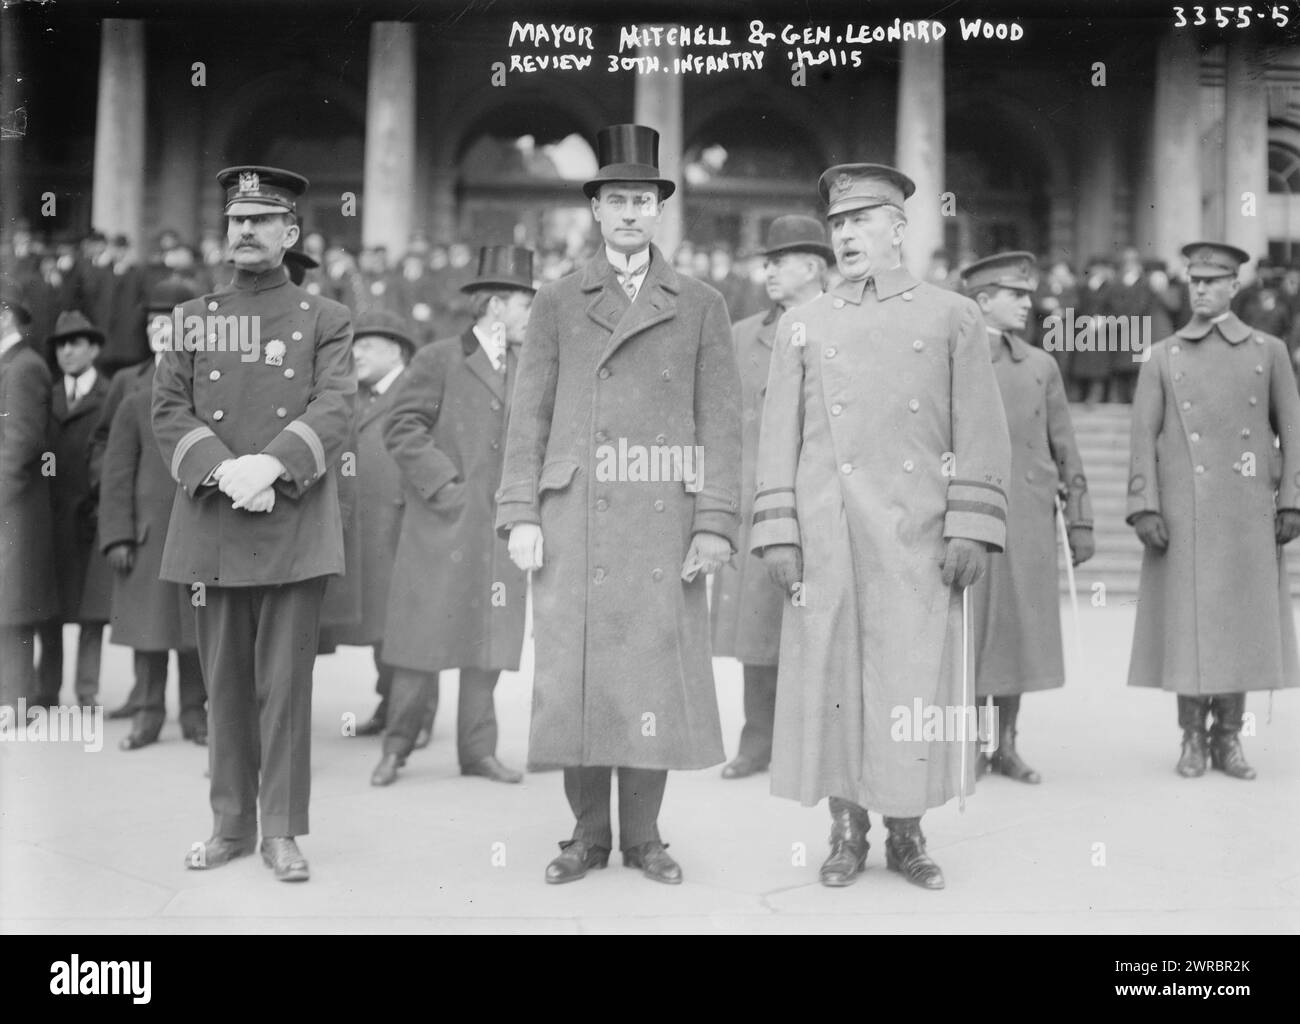 Mayor Mitchell i.e., Mitchel & Gen. Leonard Wood review 30th Infantry, Photograph shows Mayor John Purroy Mitchel (center), Major General Leonard Wood (right) and Police Commissioner Arthur Woods (left) reviewing the 30th U.S. Infantry as they passed City Hall, New York City., 1915 Jan. 20, Glass negatives, 1 negative: glass Stock Photo